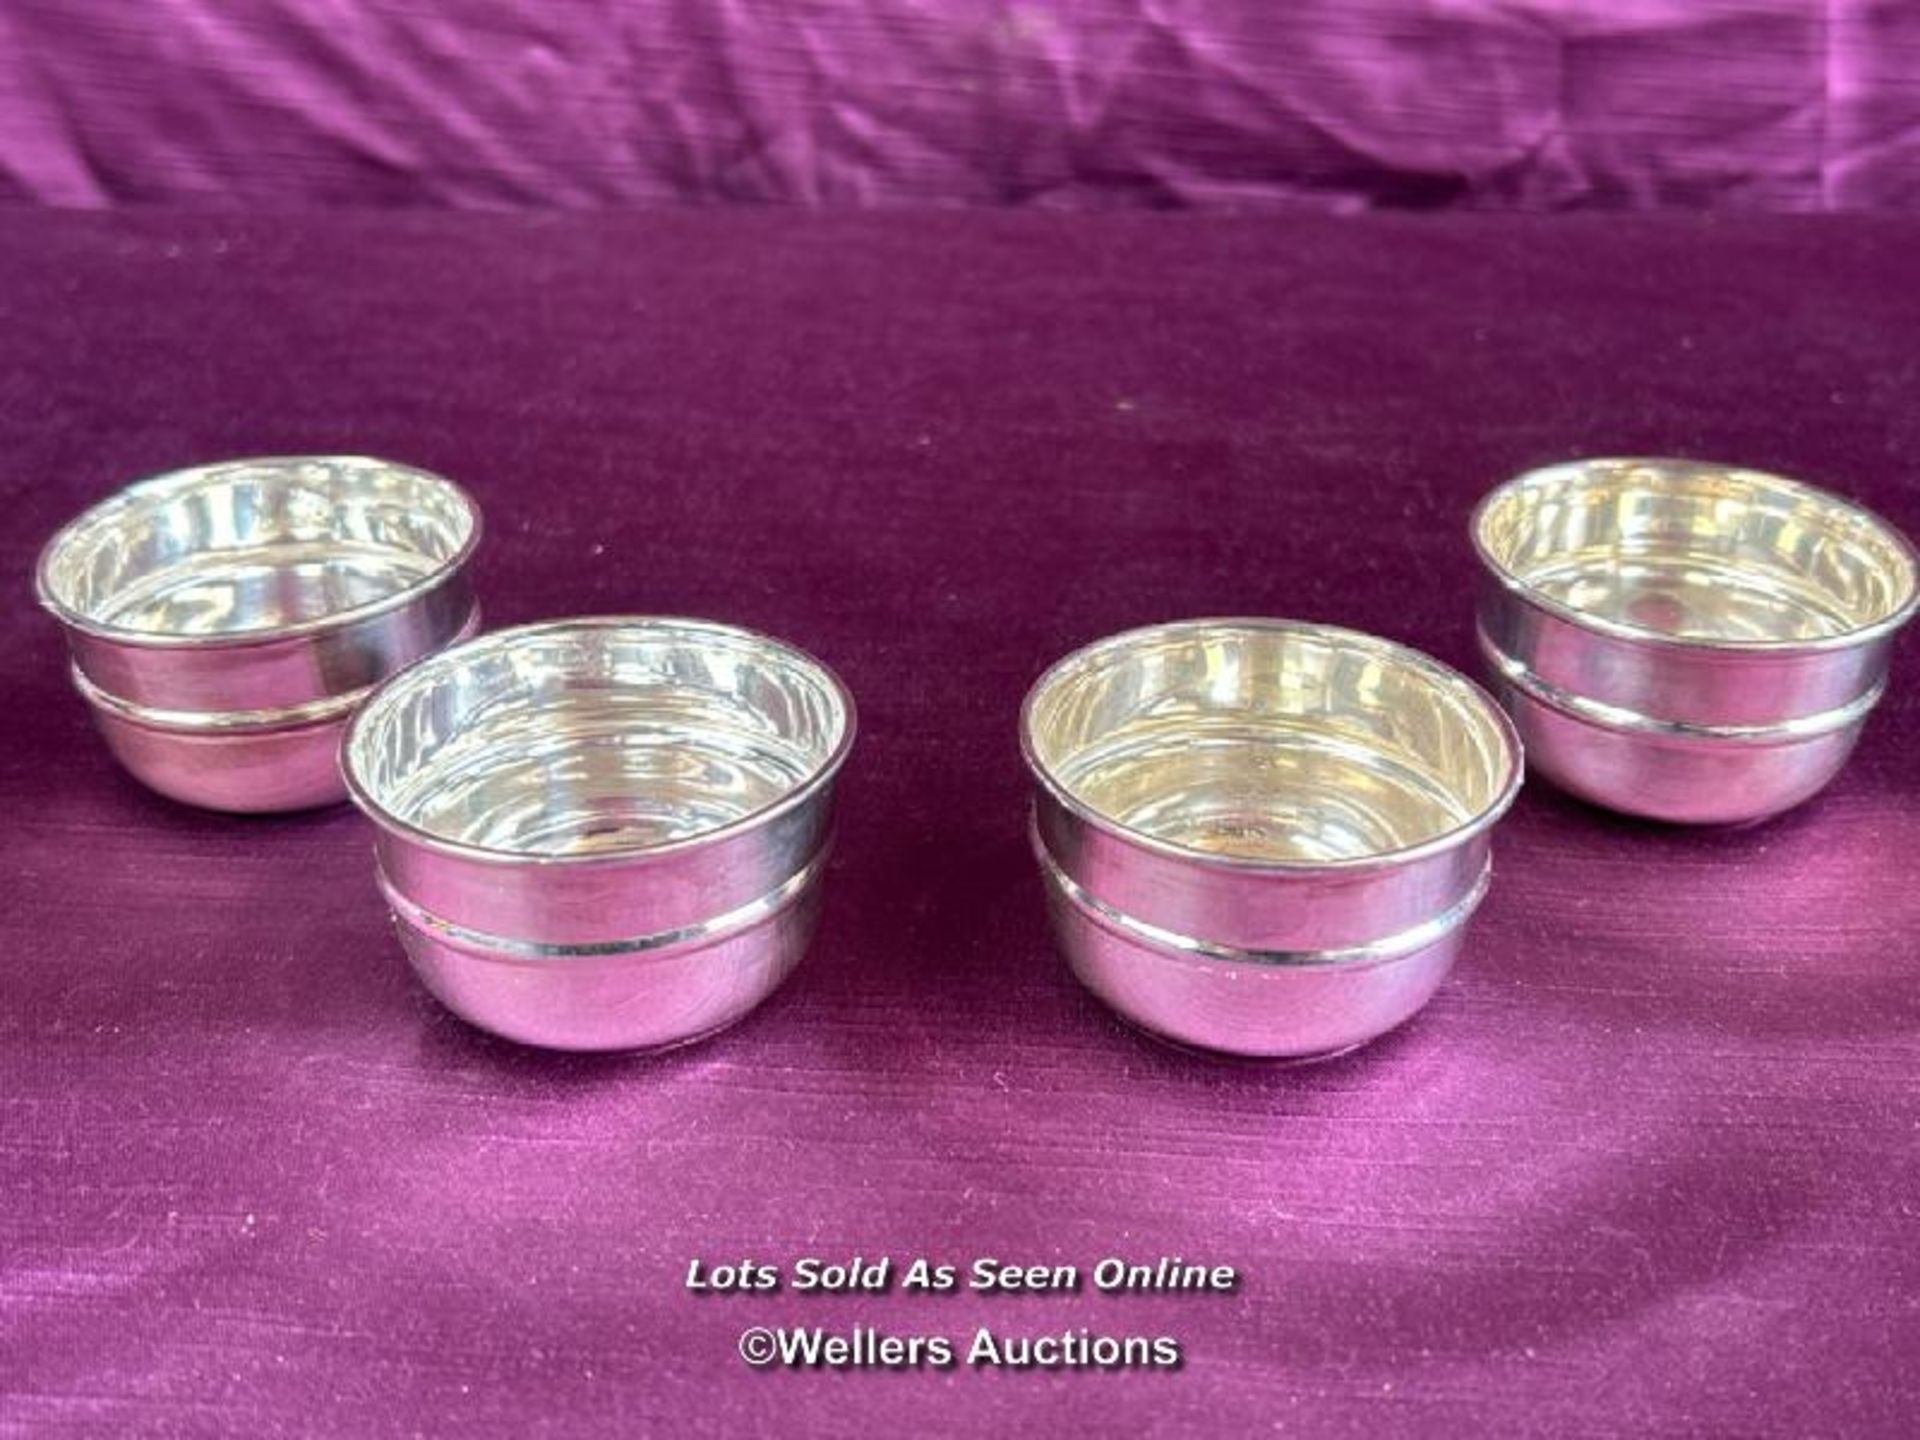 FOUR SMALL HALLMARKED SILVER SAUCE POTS BY EDWARD VINER, TOTAL WEIGHT 106GMS - Image 3 of 3